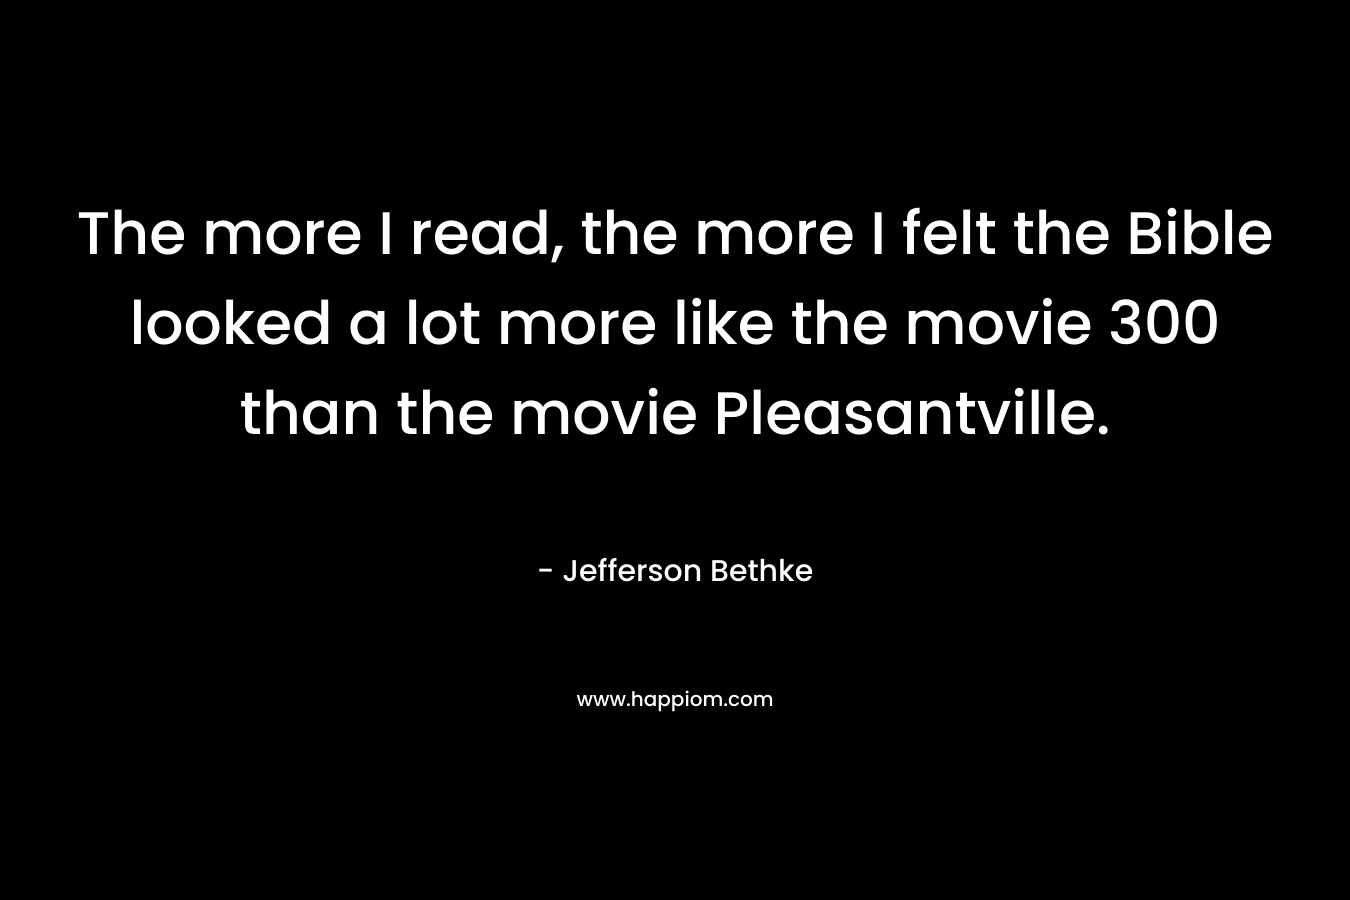 The more I read, the more I felt the Bible looked a lot more like the movie 300 than the movie Pleasantville. – Jefferson Bethke